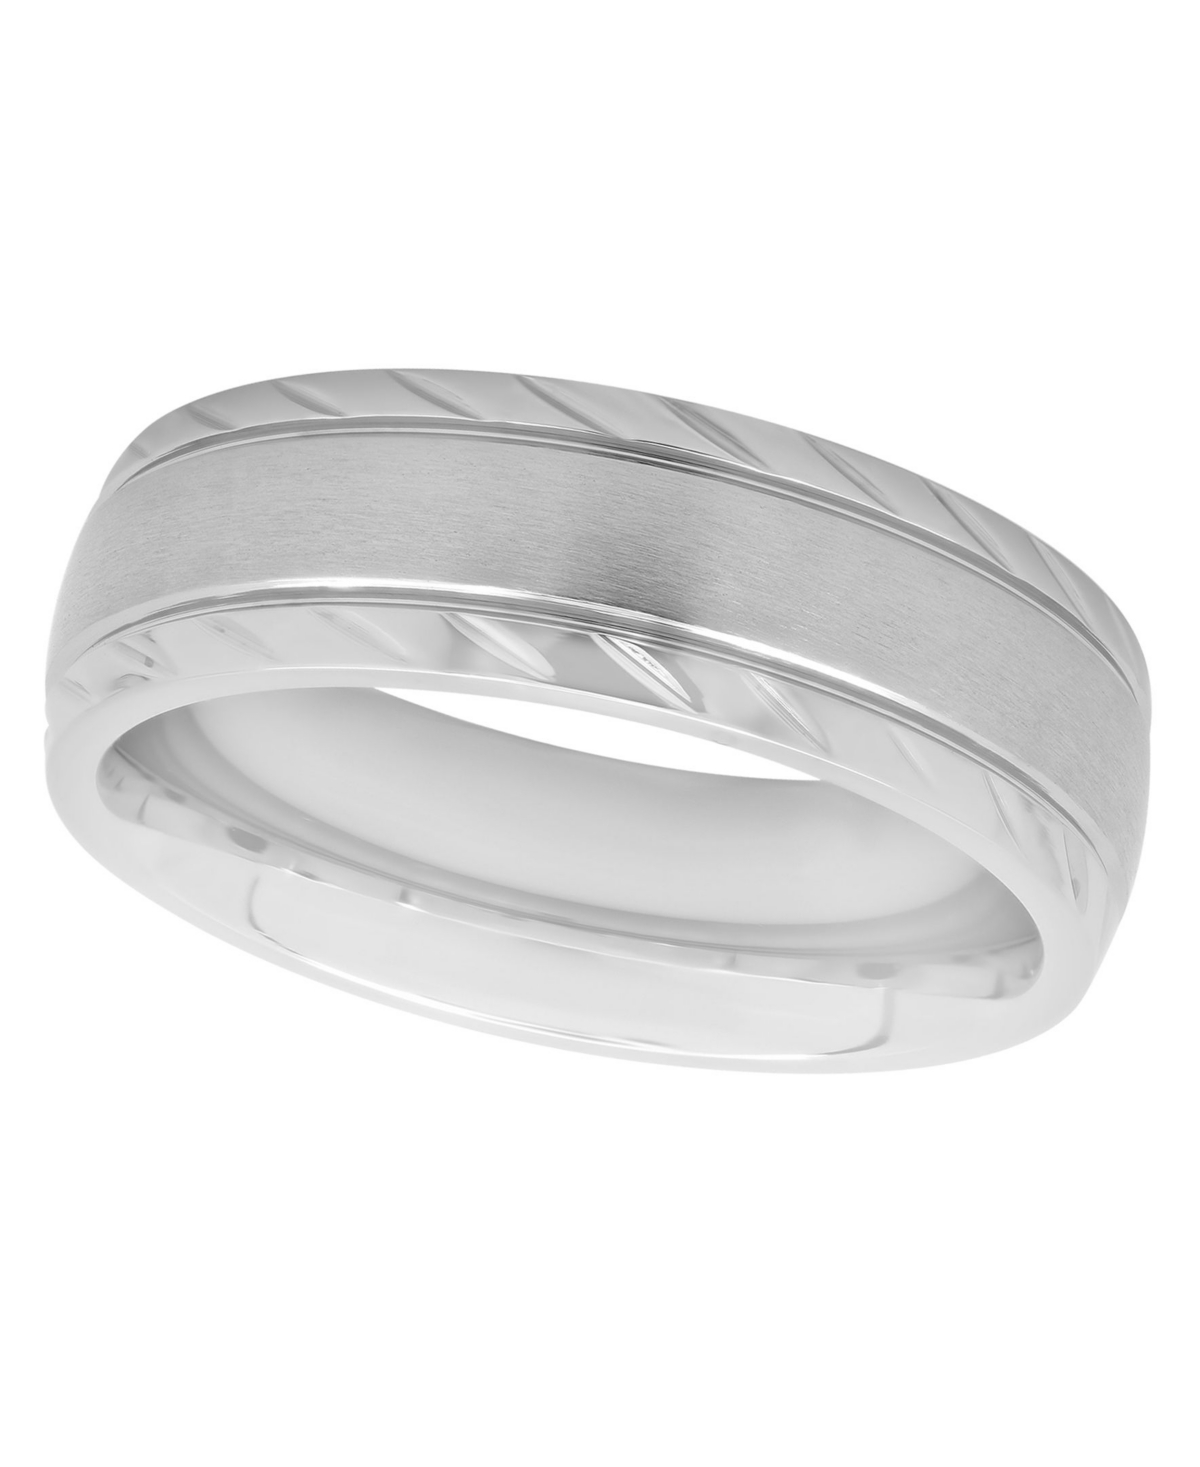 C & c Jewelry Macy's Men's Satin Notched Stainless Steel Wedding Band